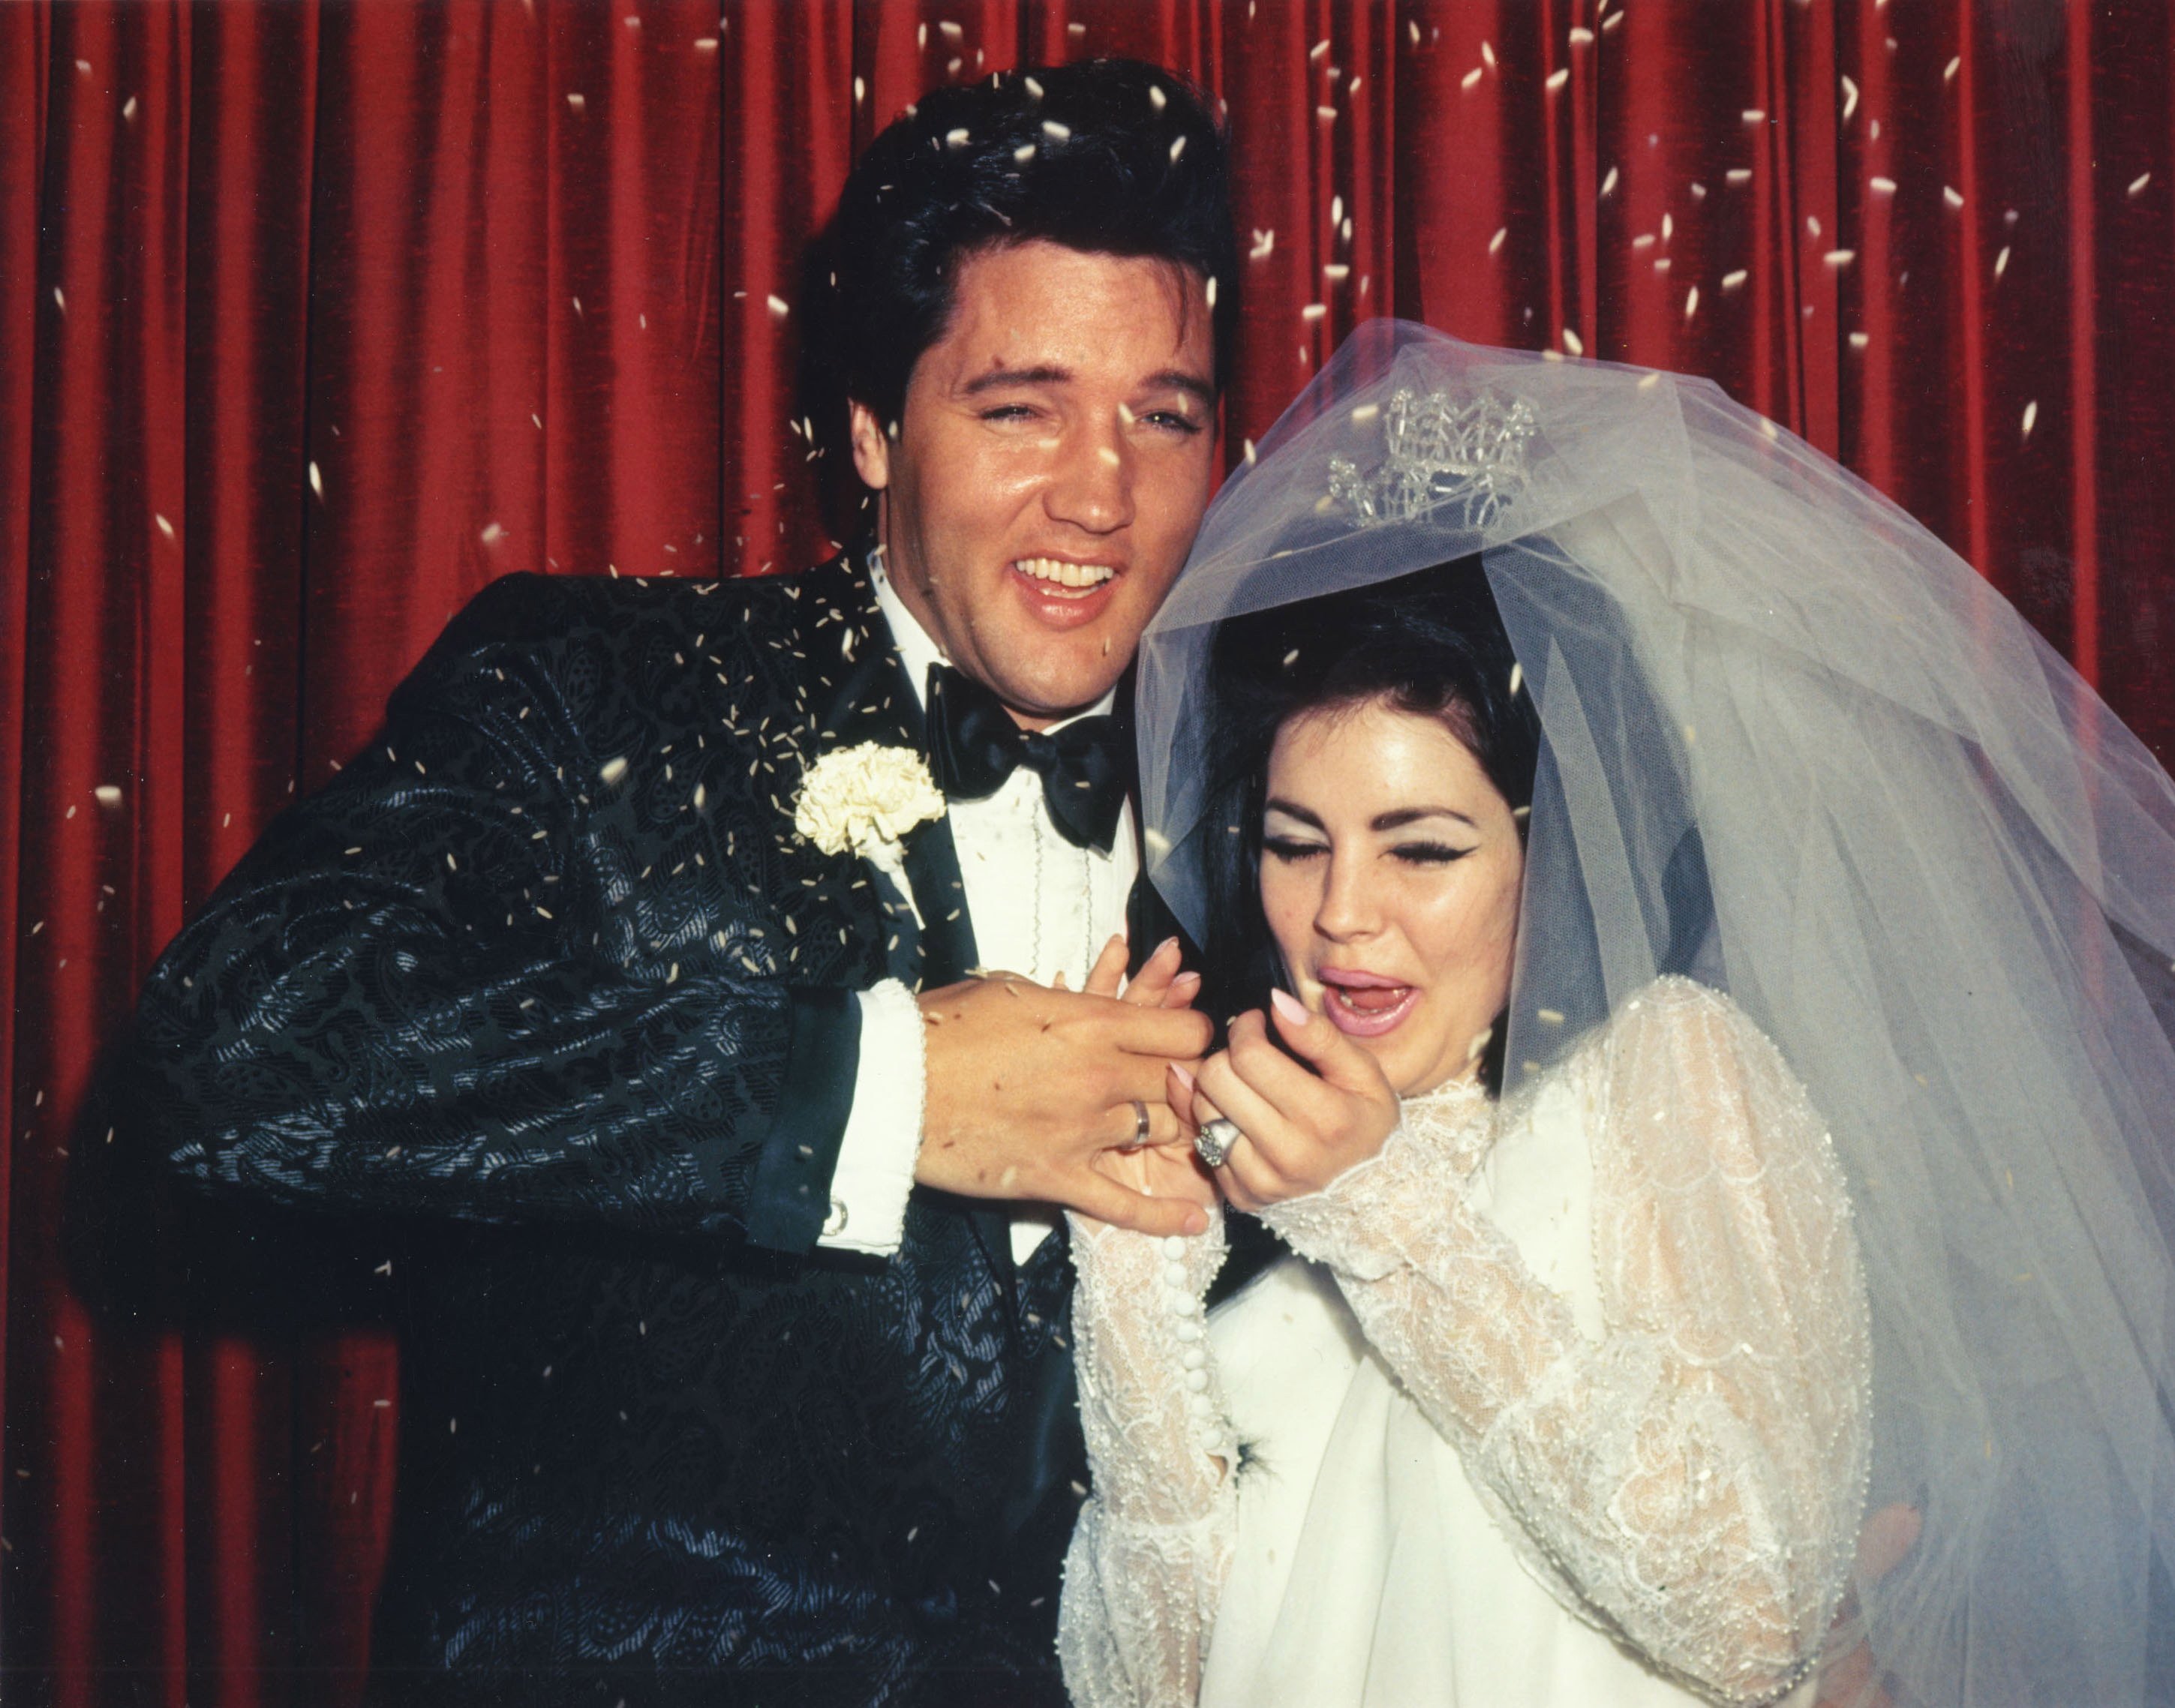 Elvis and Priscilla Presley in front of curtains